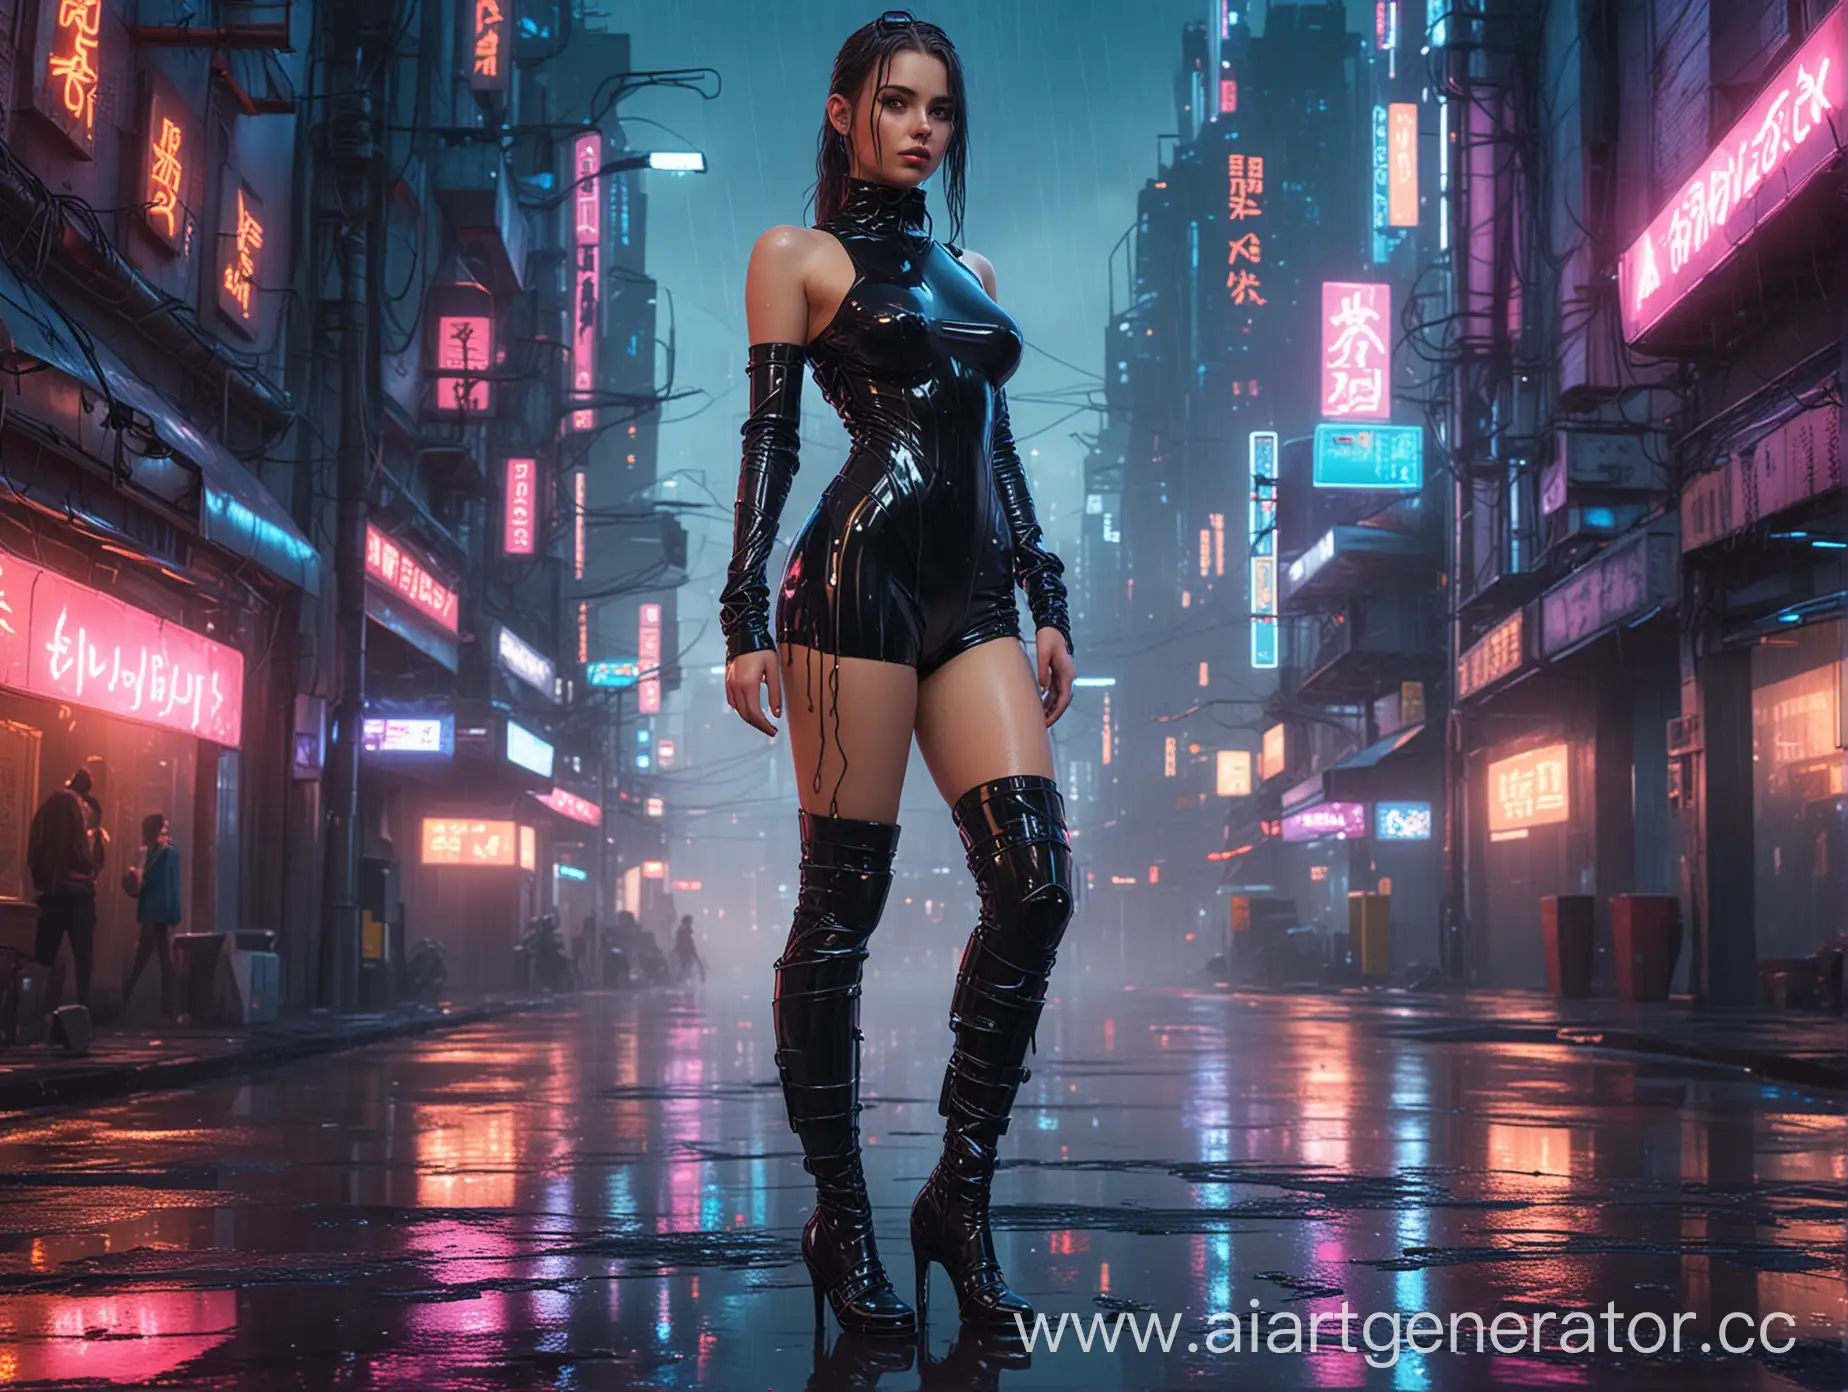 
Draw a 20 years old wonderful girl wearing wet looking translucent futuristic latex, full body shot, neon lighted cyberpunk city, bare feet 